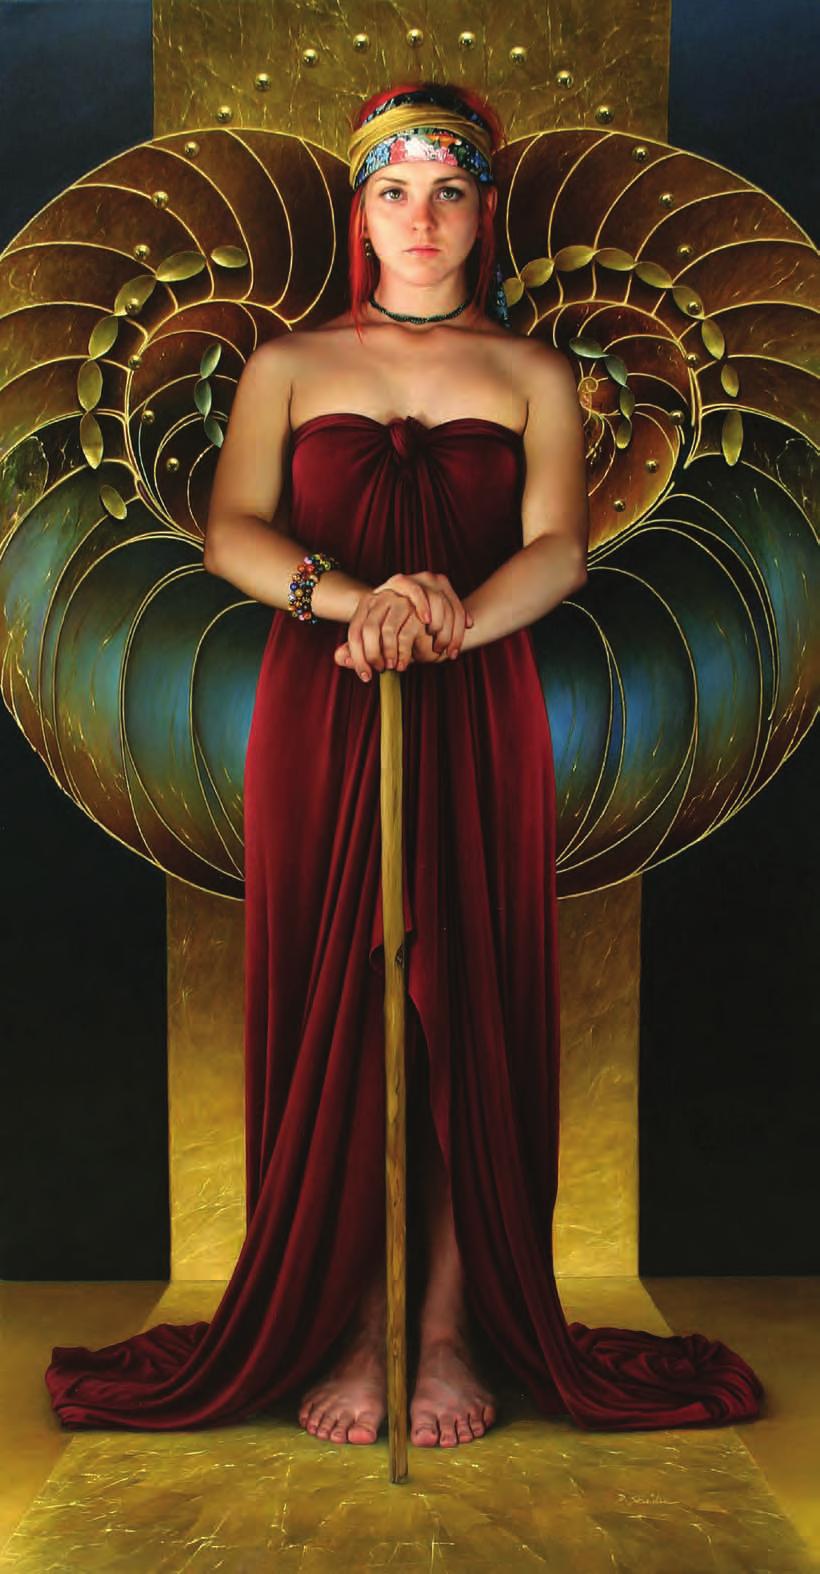 (Opposite page, clockwise from top left) Summer Shade by Karen Noles; The Girl with the Cherry Red Hair, by Duffy Sheridan; Crow Ceremonial Pouch, by Lindsay Goodwin; Light on Copper, by Ed Copley.